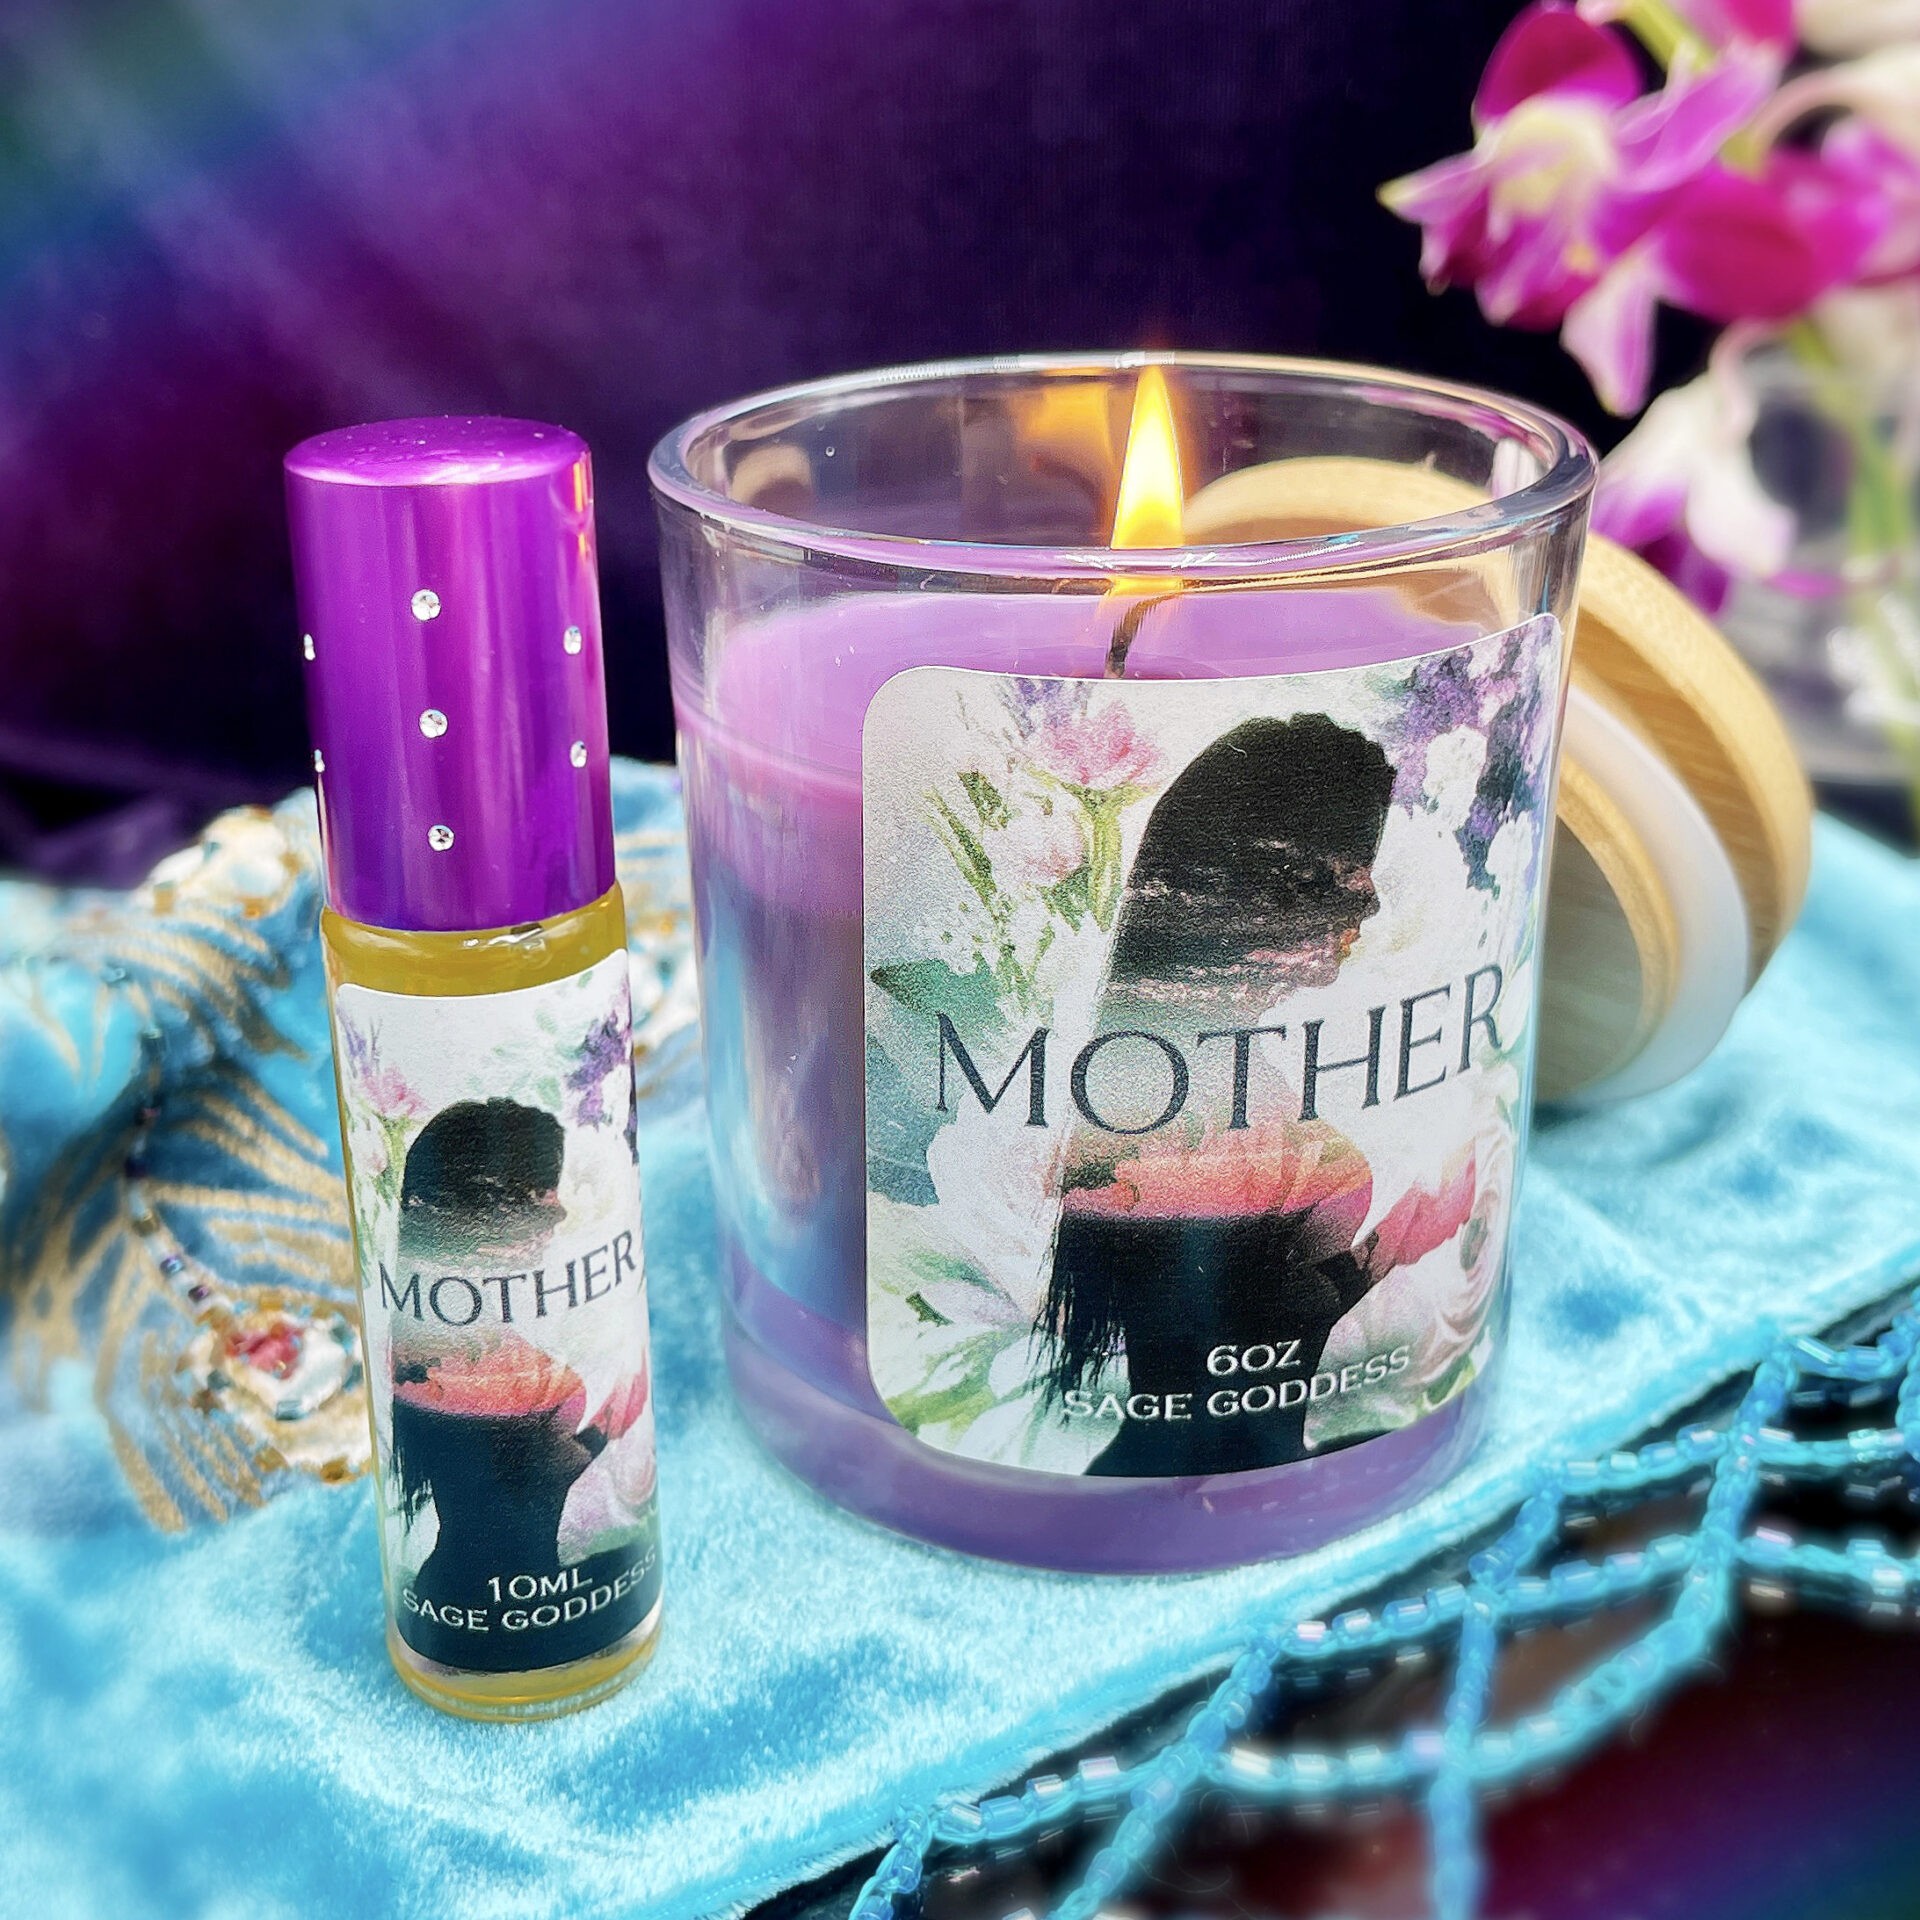 https://www.sagegoddess.com/wp-content/uploads/2023/05/Mother_Perfume_and_Intention_Candle_Duo_1of1.jpg.optimal.jpg